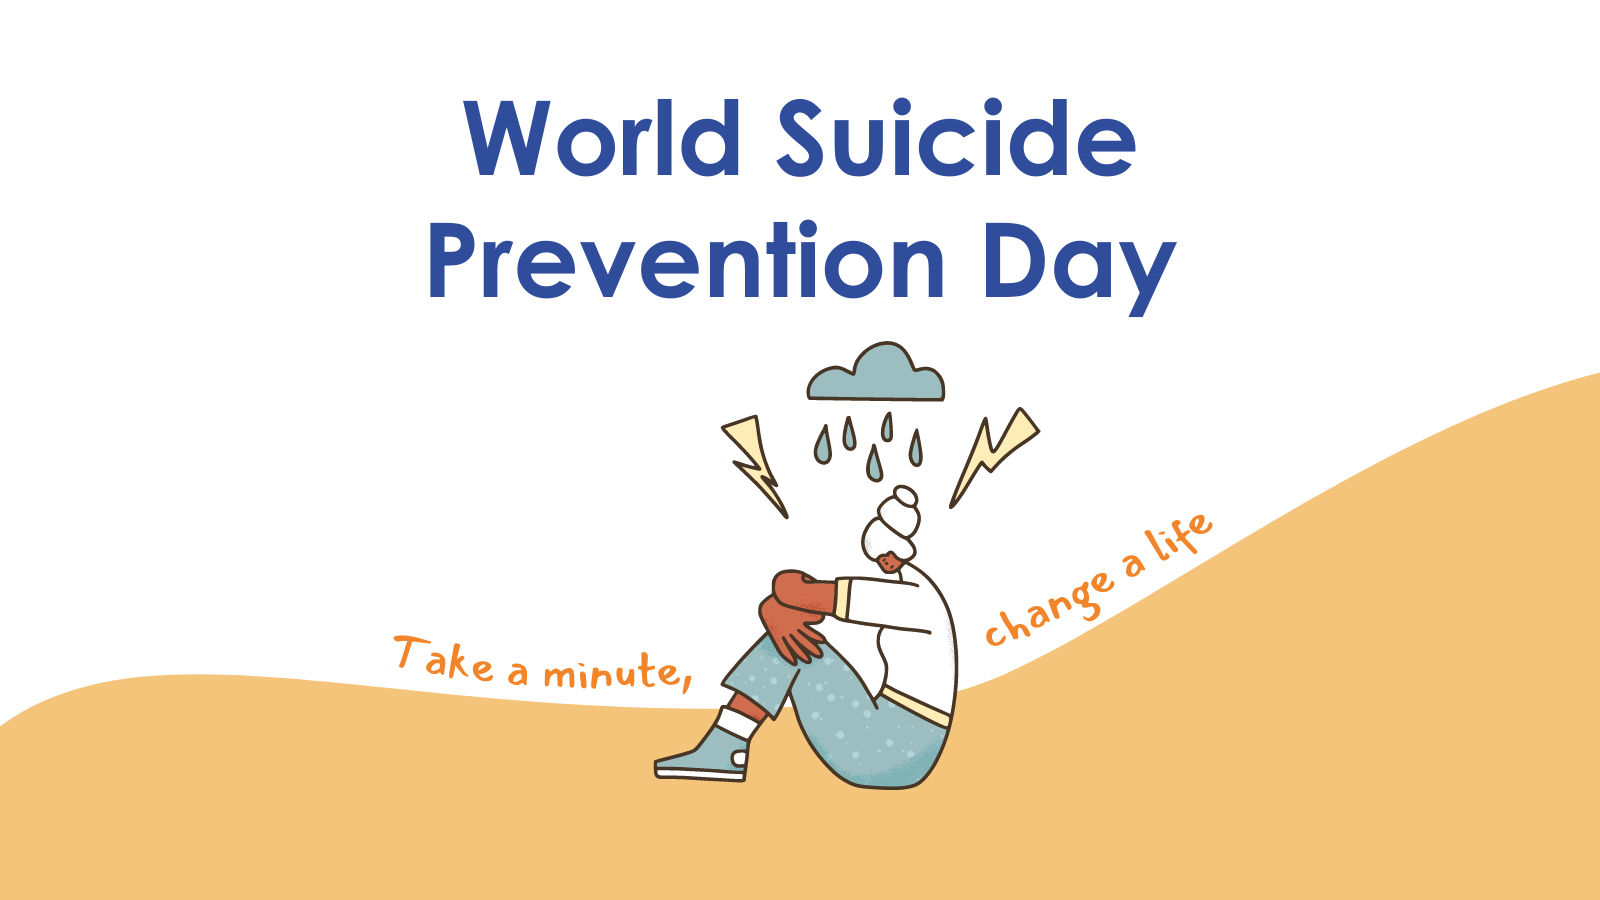 September is Suicide Prevention and Awareness Month and Friday, September 10th, is World Suicide Prevention Day. The reality we face is that suicide affects people of all ages and backgrounds. Learn more about suicide prevention and resiliency in our bl